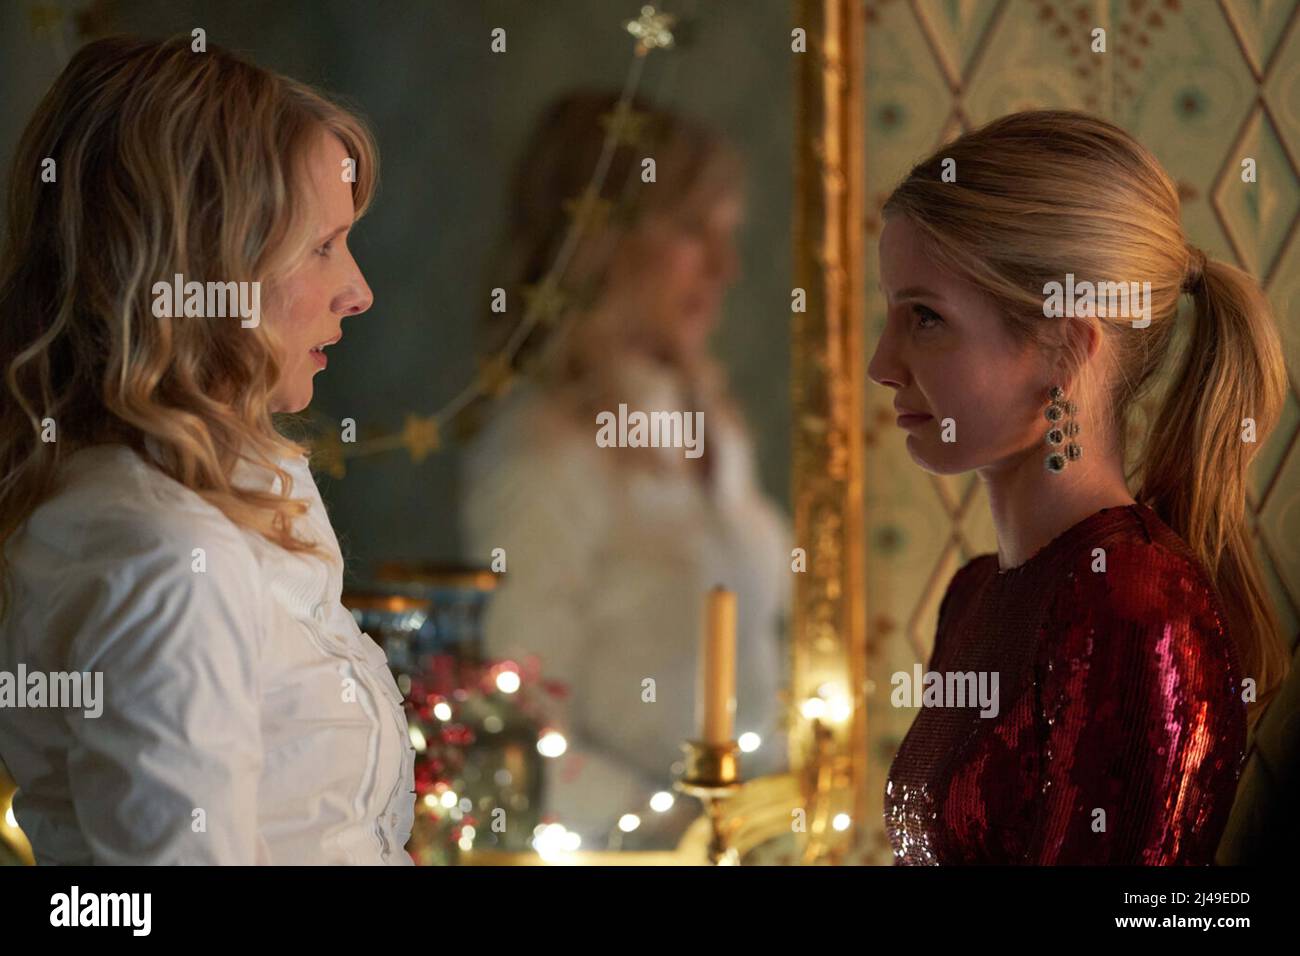 SILENT NIGHT (2021) LUCY PUNCH ANNABELLE WALLIS CAMILLE GRIFFIN (DIR) RLJE FILMS/MOVIESTORE COLLECTION Stockfoto